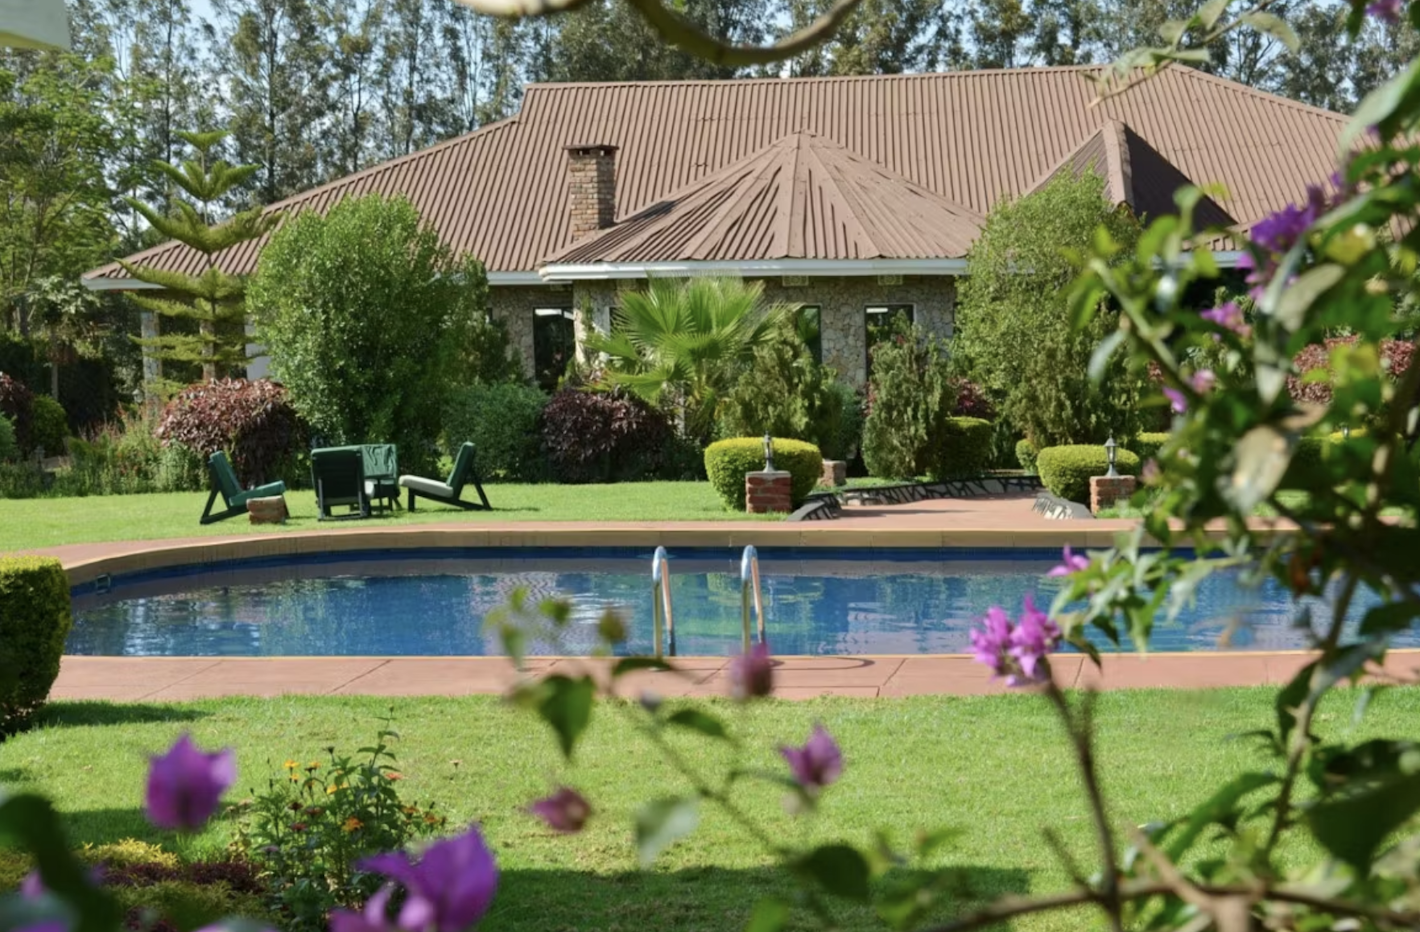 Retreat from the bump and trundle of a 4x4 at this fetching lodge, shielded by a lush tropical garden and full of locally-flavoured amenities. Built at a handy midway point between Lake Manyara and the Ngorongoro Crater, there is an impressive...